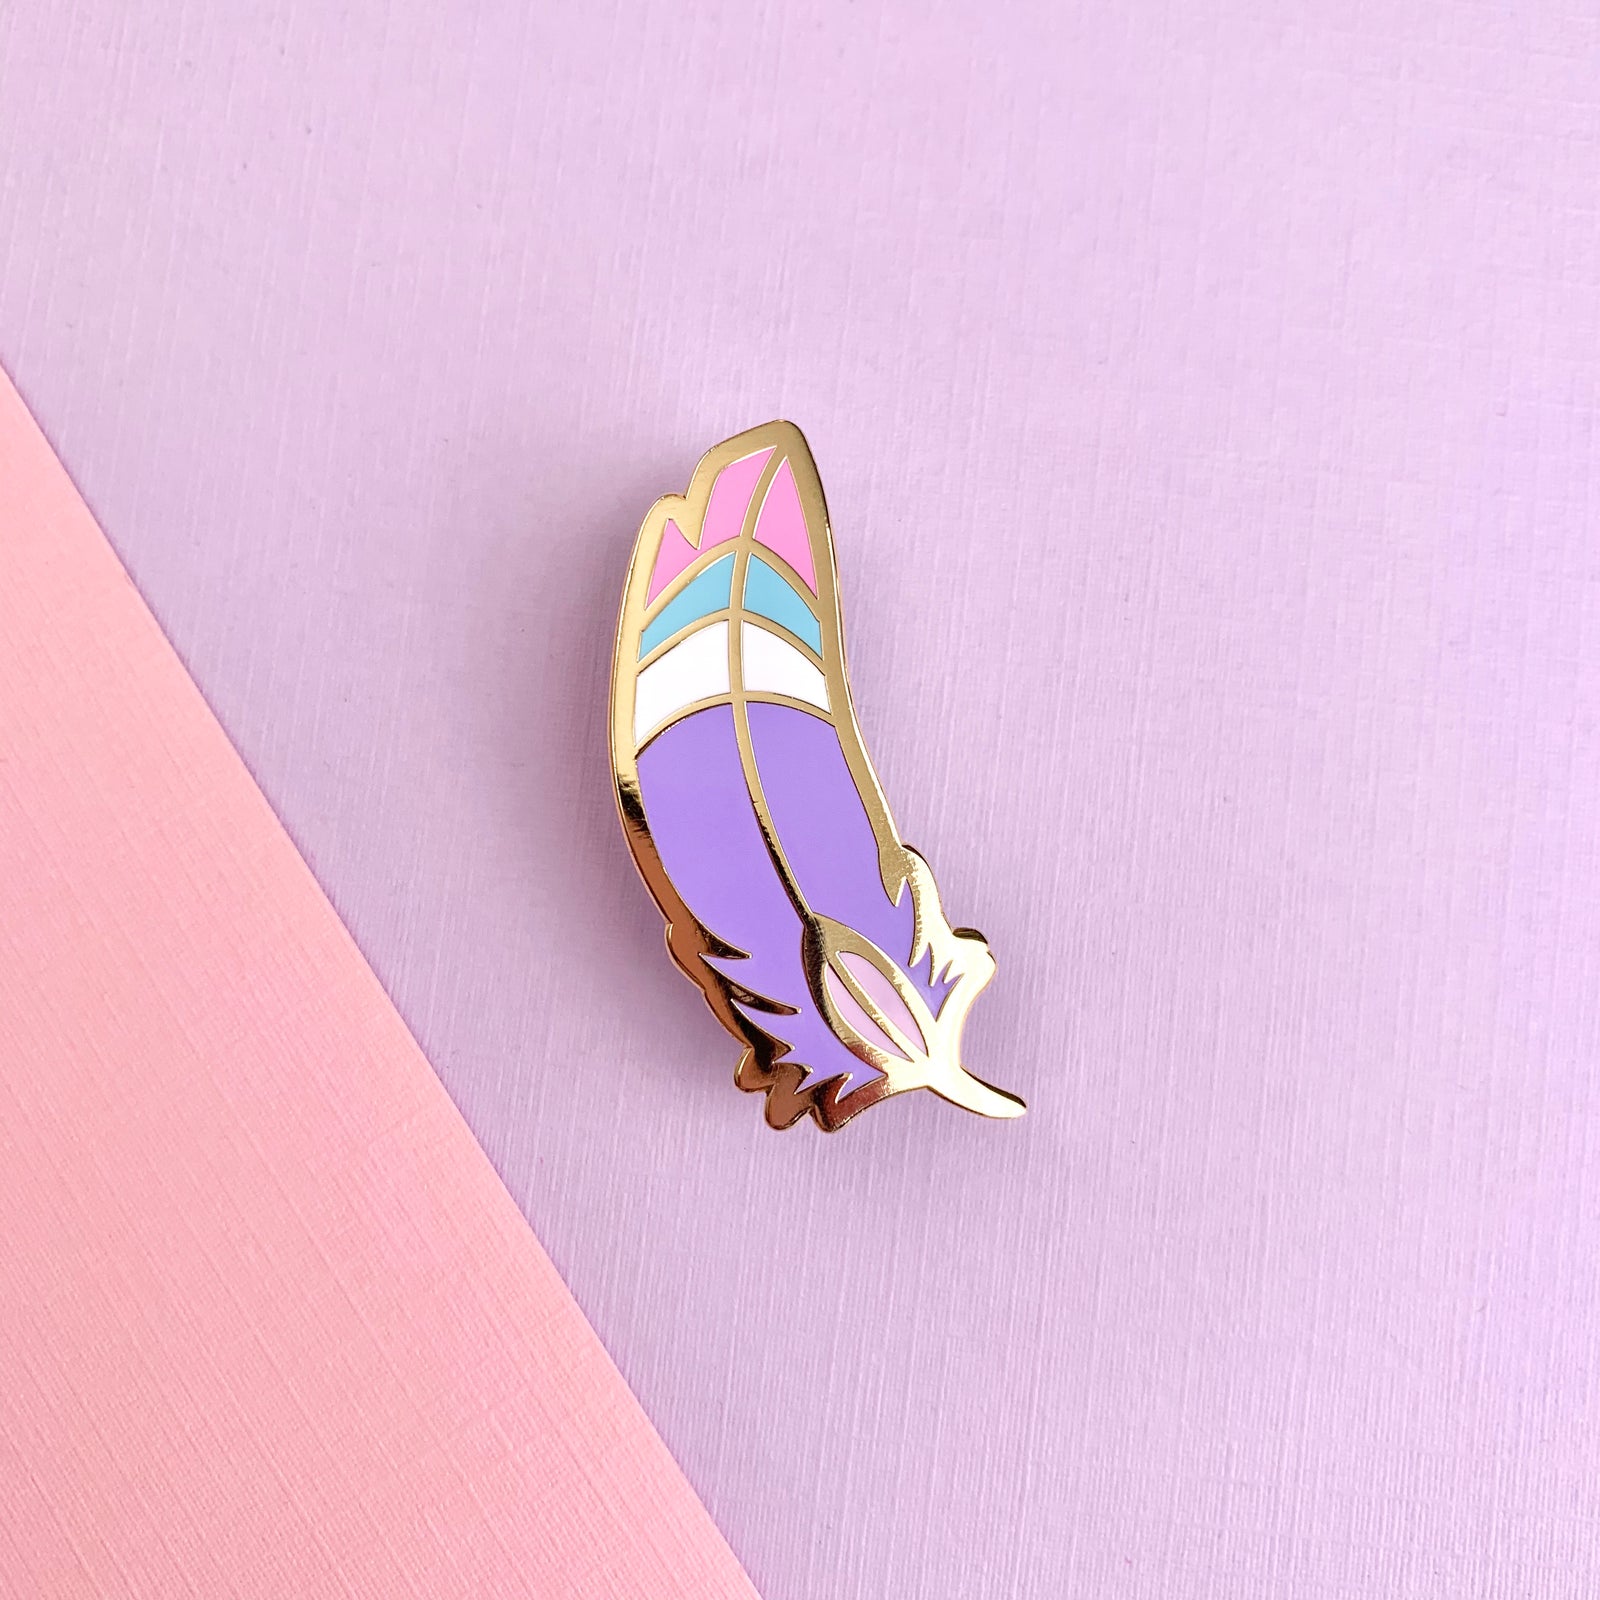 Zelda's Loftwing Feather Enamel Pin by Shumi Collective